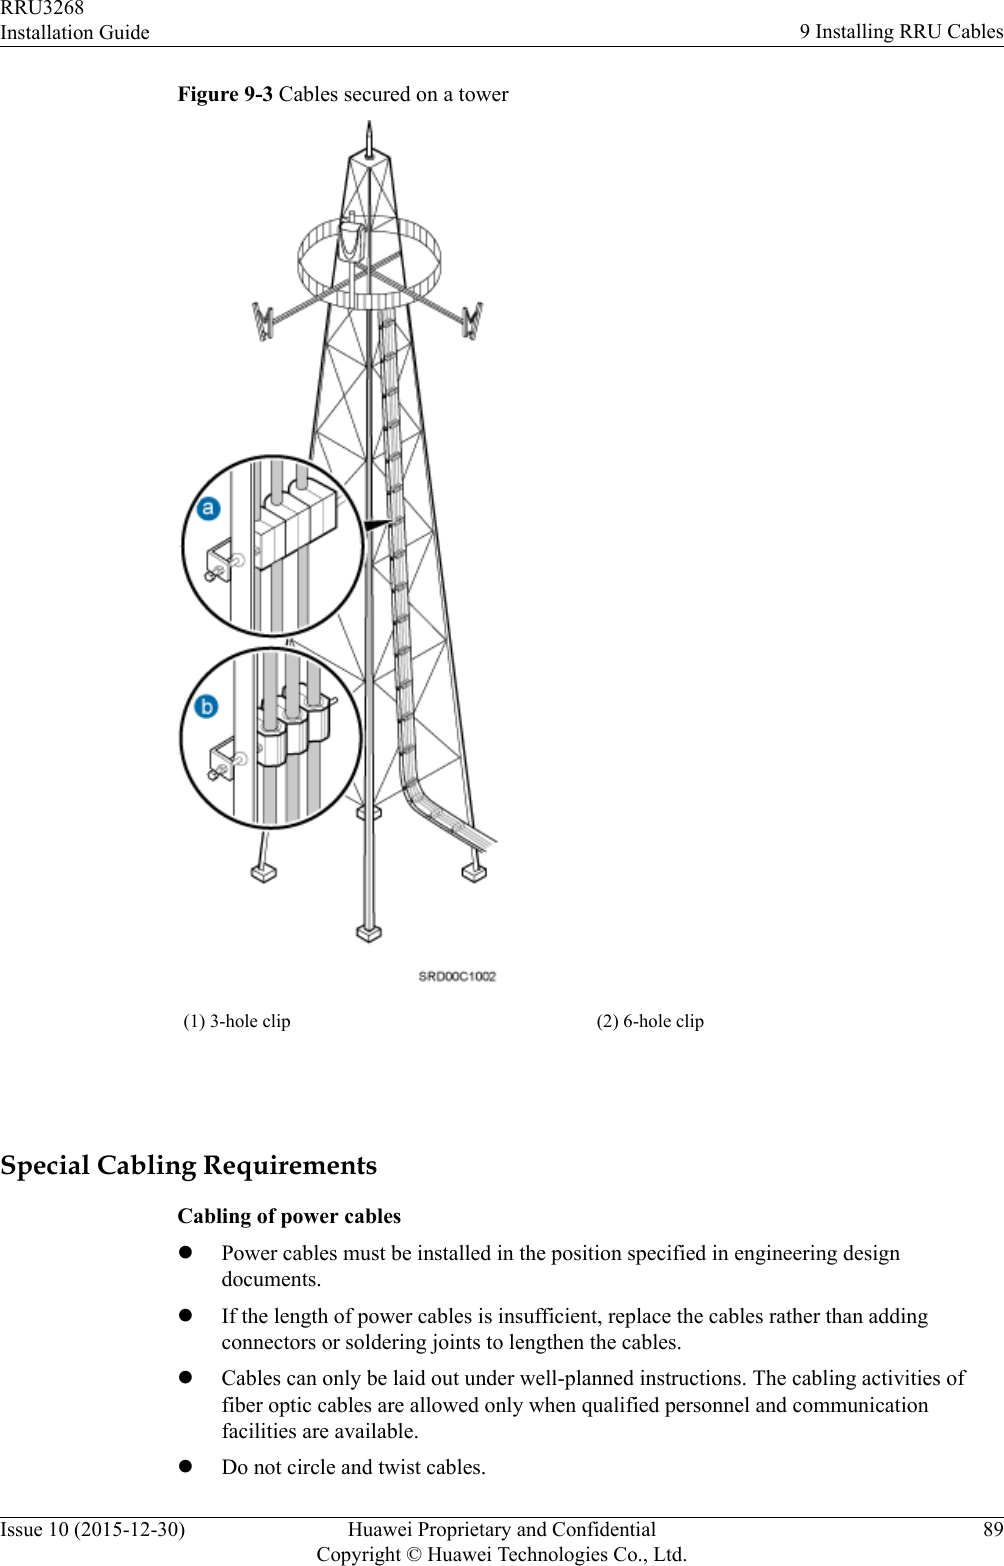 Figure 9-3 Cables secured on a tower(1) 3-hole clip (2) 6-hole clip Special Cabling RequirementsCabling of power cableslPower cables must be installed in the position specified in engineering designdocuments.lIf the length of power cables is insufficient, replace the cables rather than addingconnectors or soldering joints to lengthen the cables.lCables can only be laid out under well-planned instructions. The cabling activities offiber optic cables are allowed only when qualified personnel and communicationfacilities are available.lDo not circle and twist cables.RRU3268Installation Guide 9 Installing RRU CablesIssue 10 (2015-12-30) Huawei Proprietary and ConfidentialCopyright © Huawei Technologies Co., Ltd.89